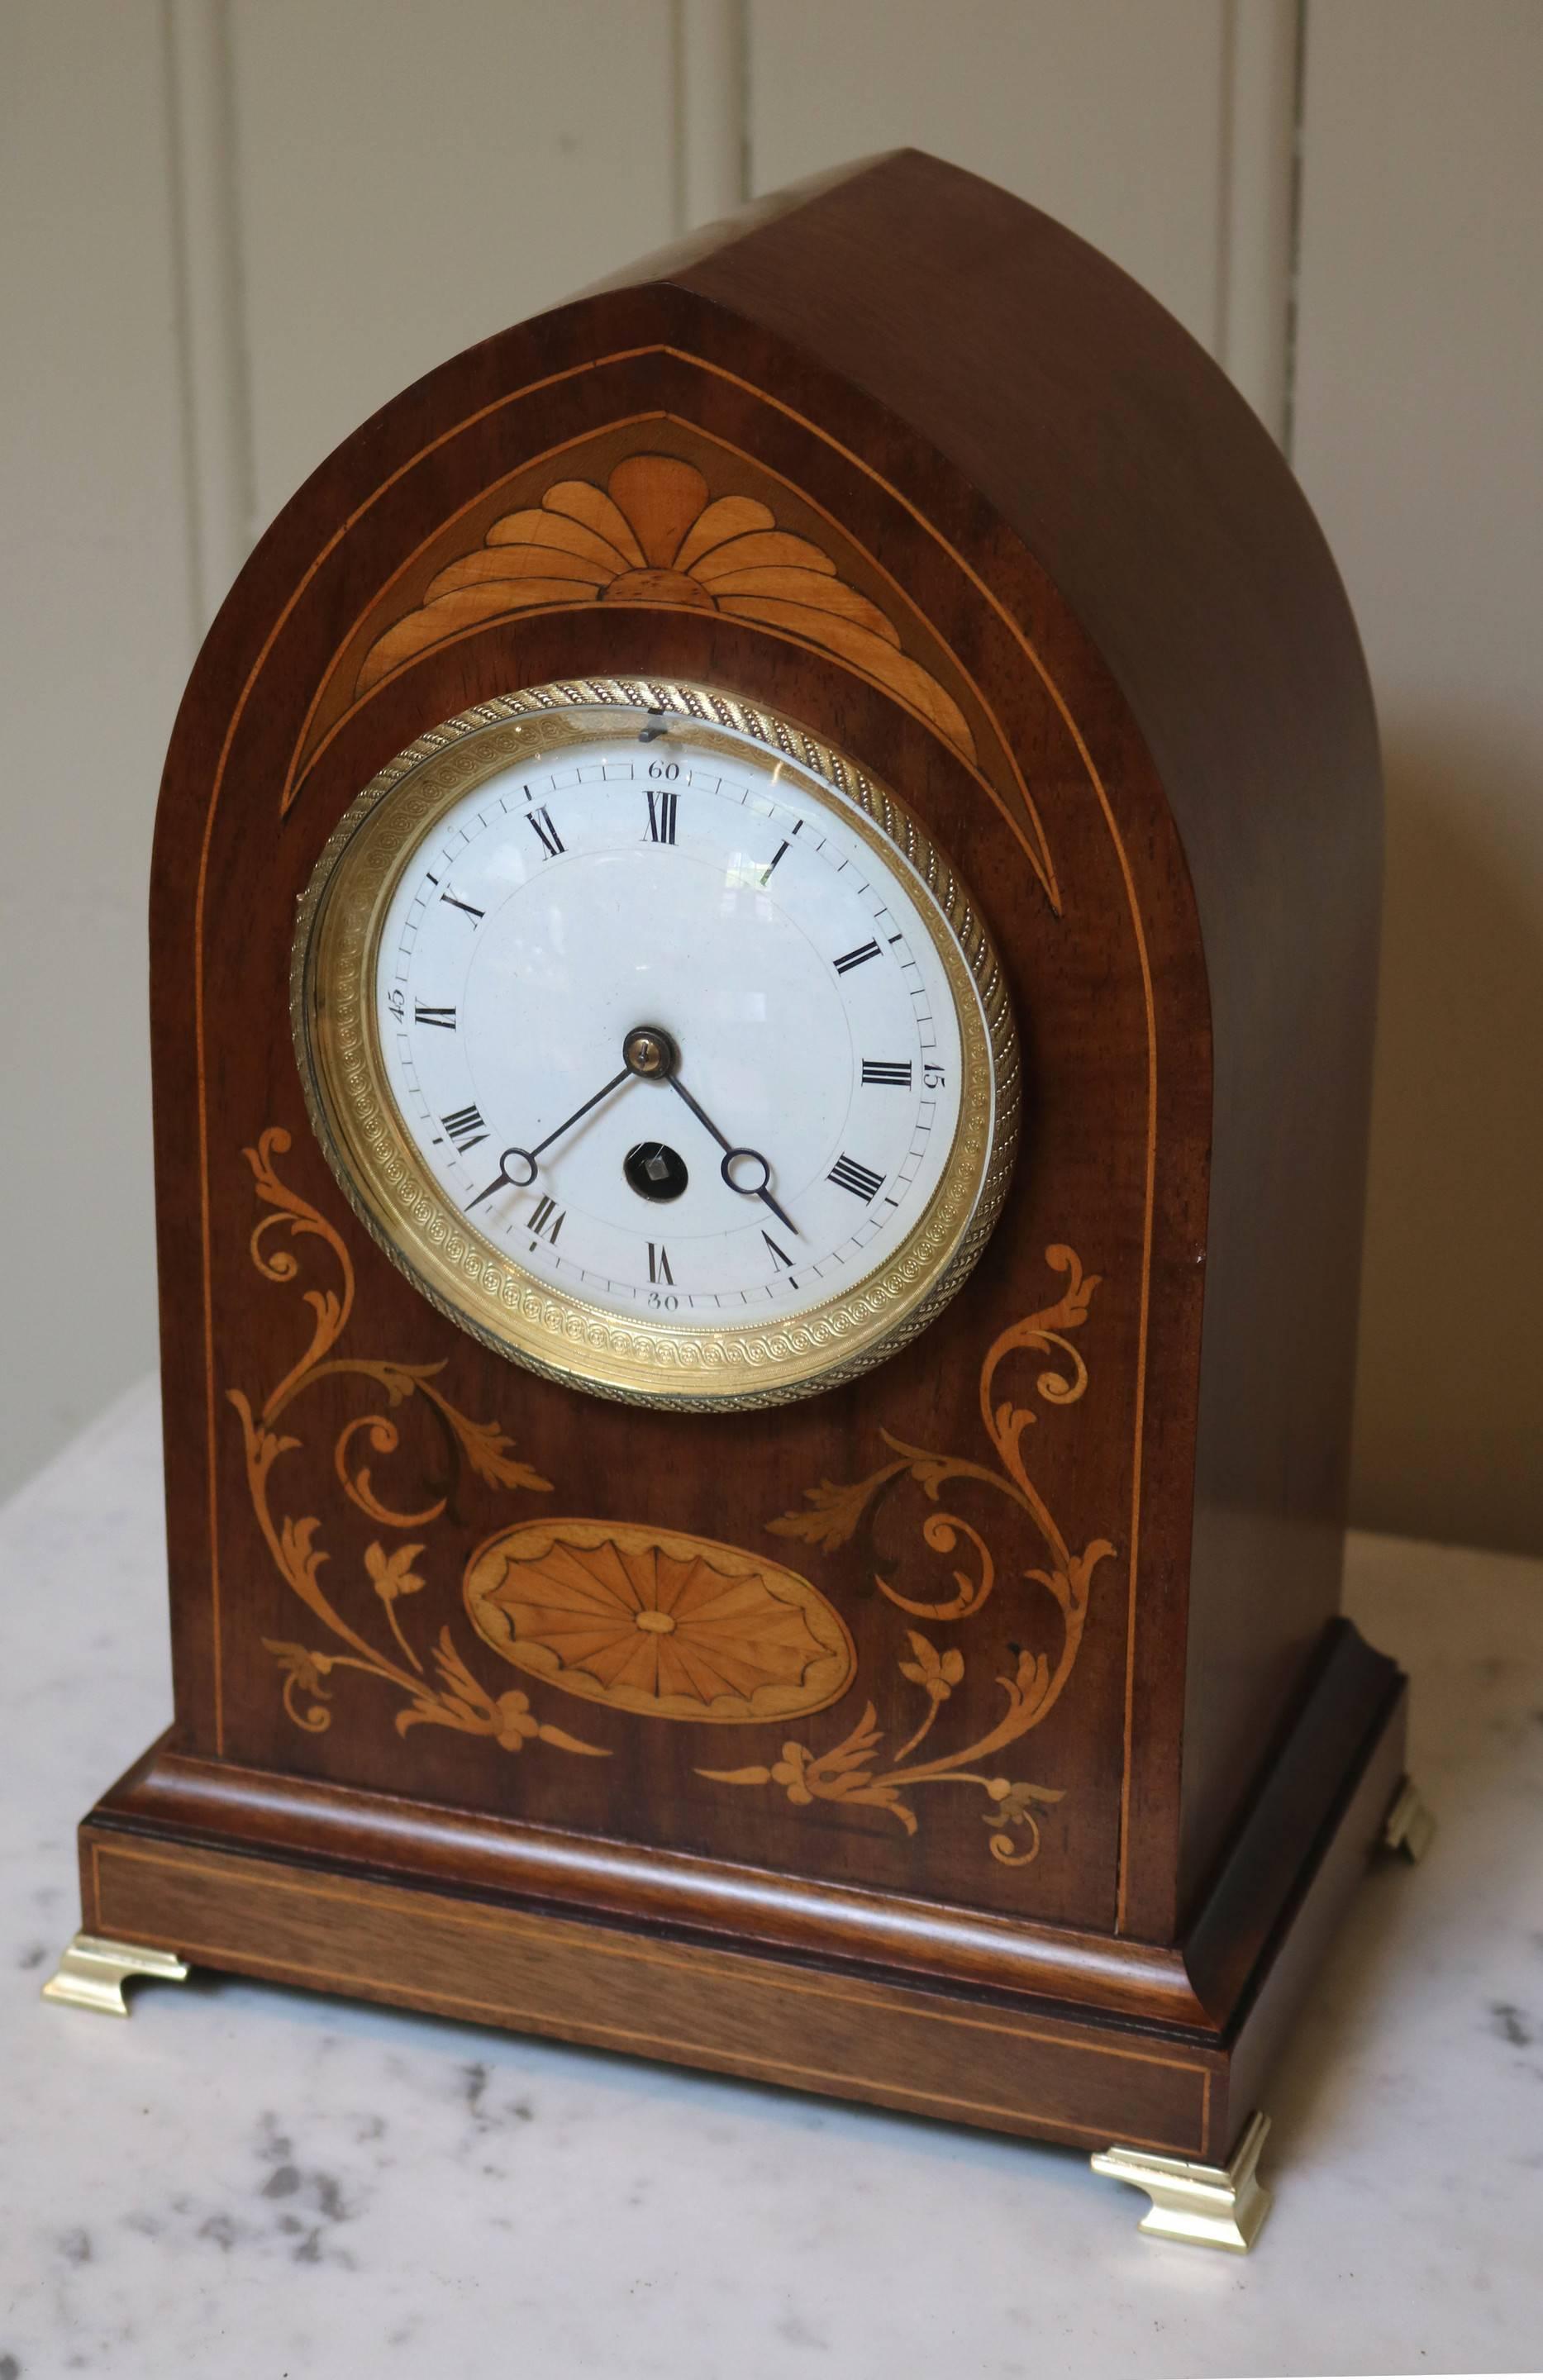 A mahogany lancet top mantel clock. It has a lancet top case with a front panel inlaid with boxwood stringing and floral marquetry satinwood inlays. It has a convex glass with an embossed bezel and sight ring and white enamel dial with steel moon